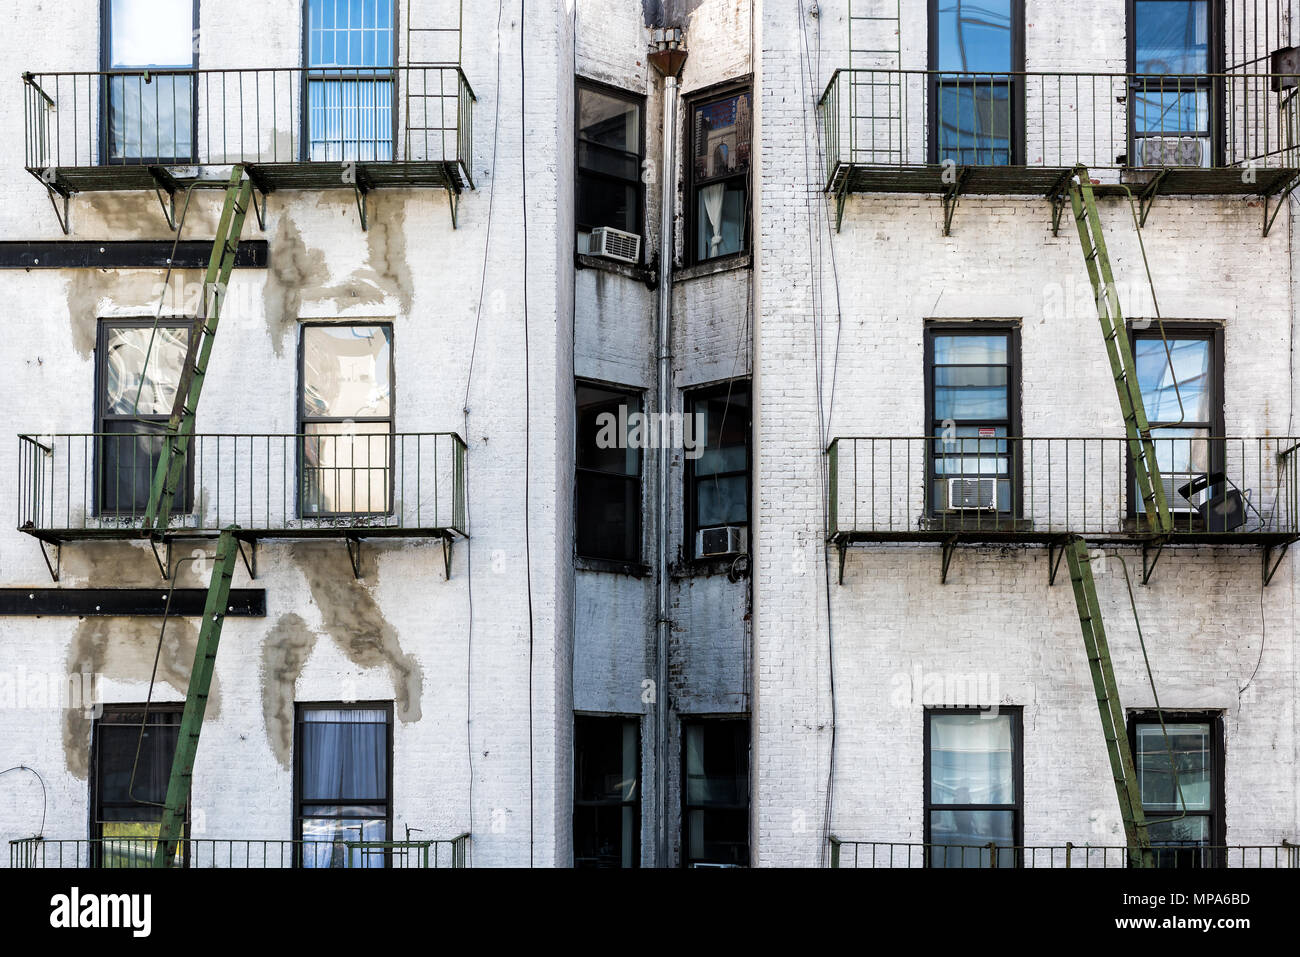 Old apartment condo building exterior architecture in Chelsea, NYC, Manhattan, New York City with fire escapes, windows, green ladders Stock Photo